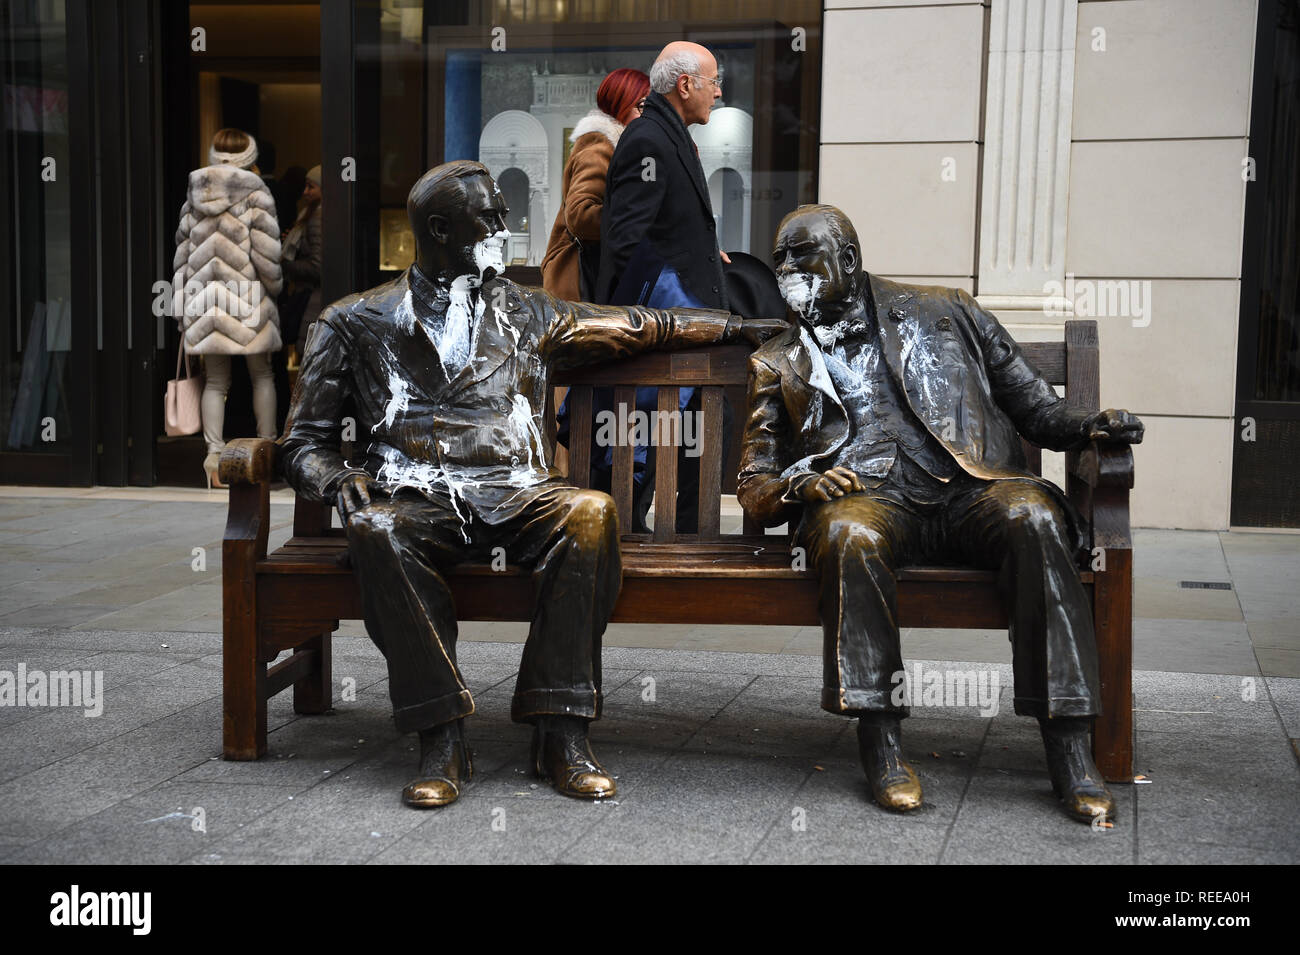 The figures of Franklin D Roosevelt and Winston church on the Allies sculpture in New Bond Street, London, which has been vandalised with white paint. Stock Photo